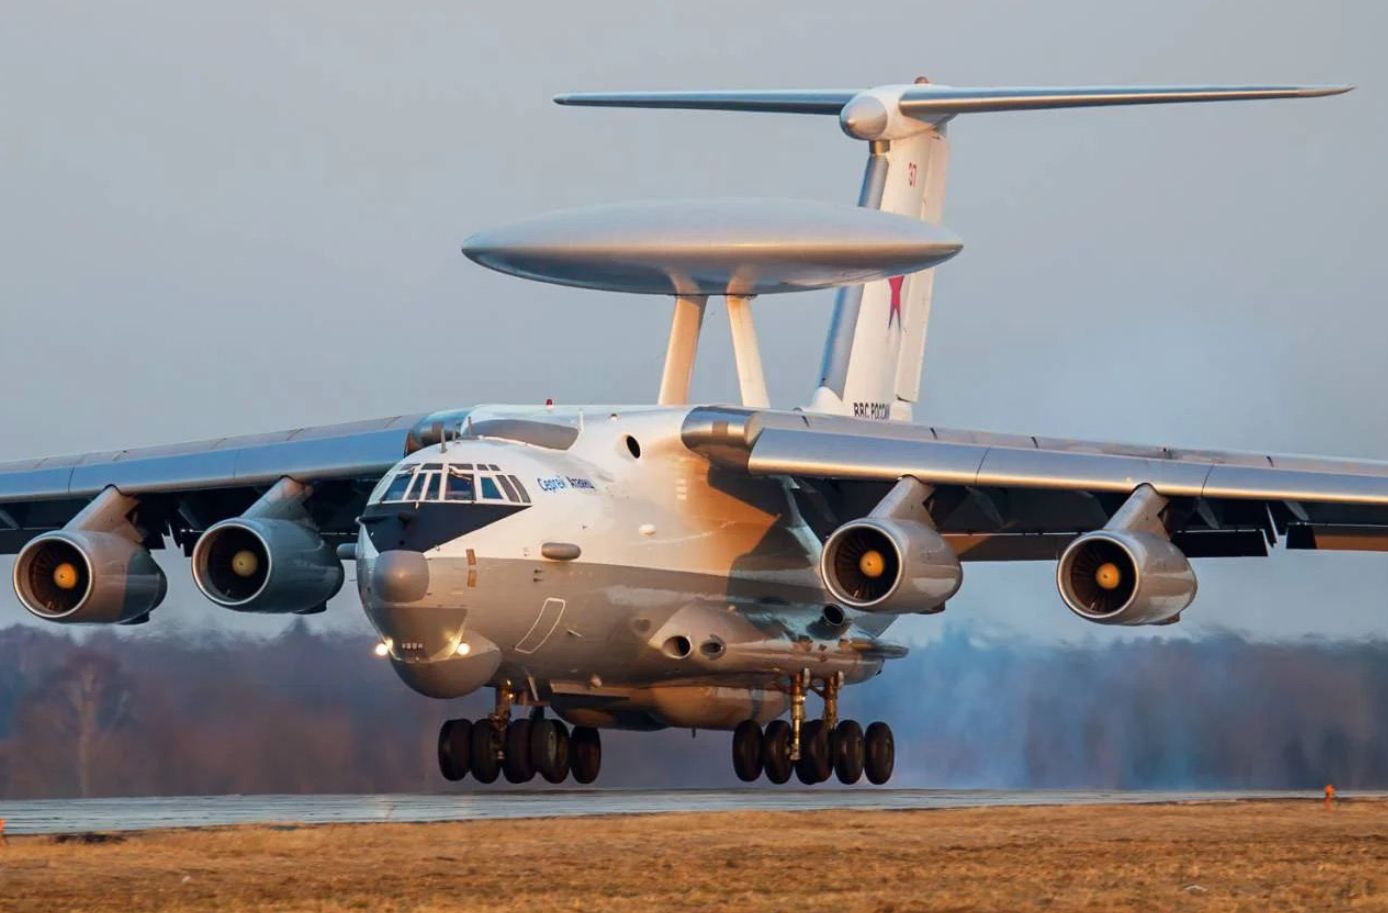 Russian A-50 military aircraft